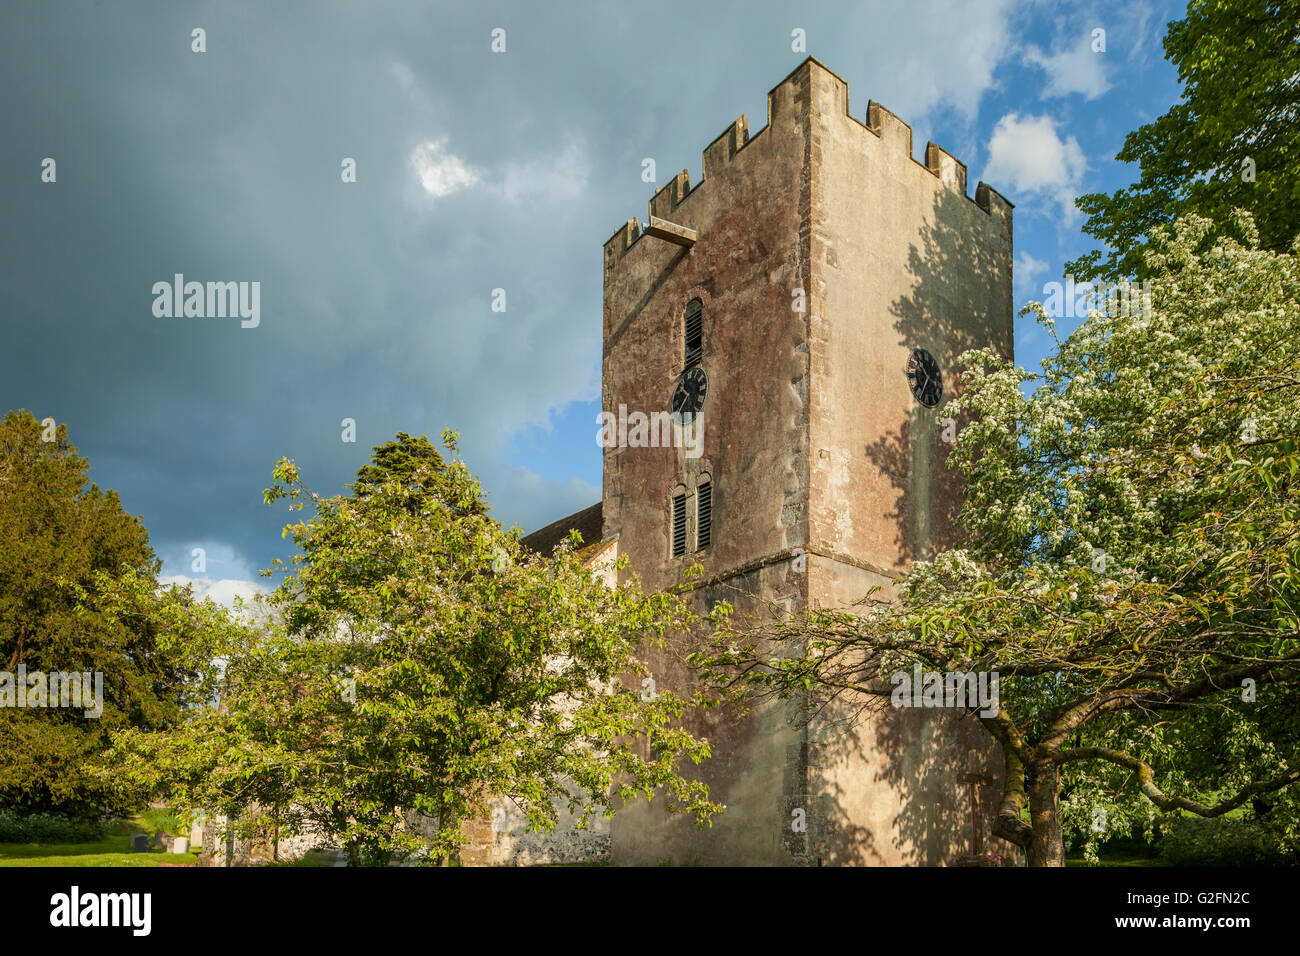 The Saxon church of St Mary in Singleton, West Sussex, England. Stock Photo